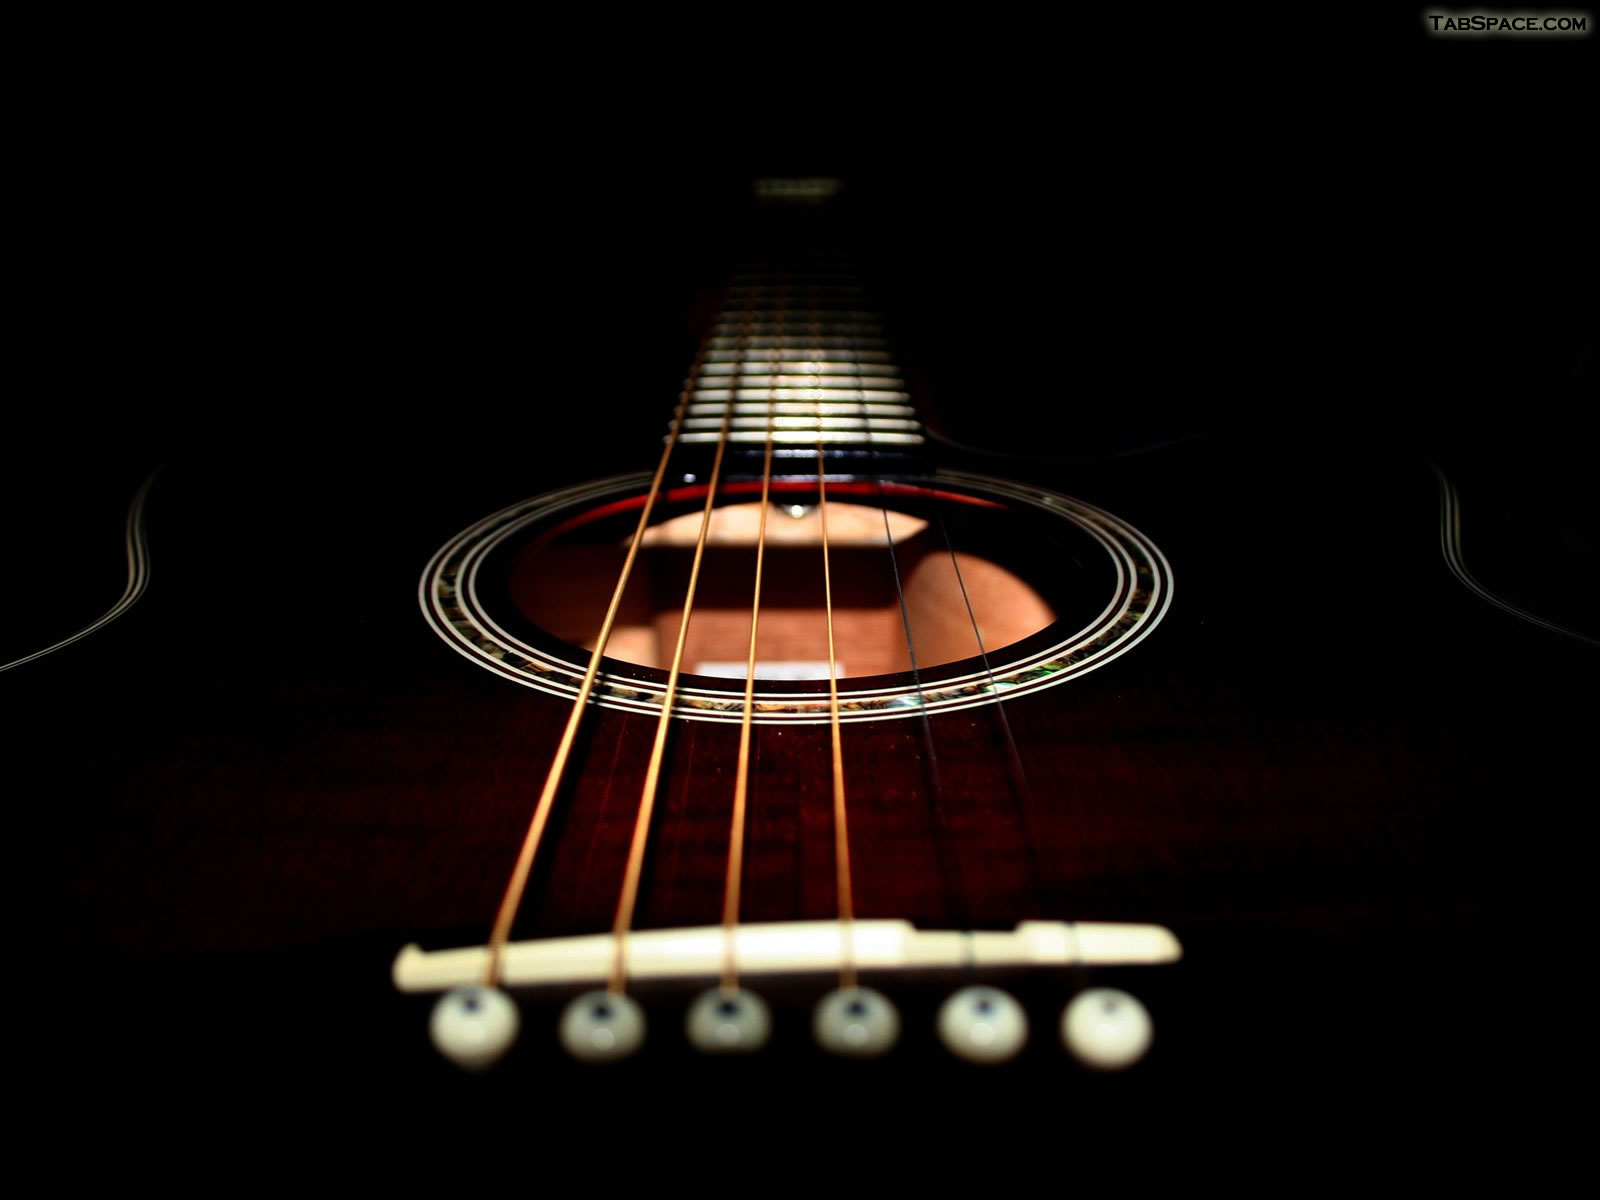 Guitar Wallpaper For Desktop High Definition And HD Background